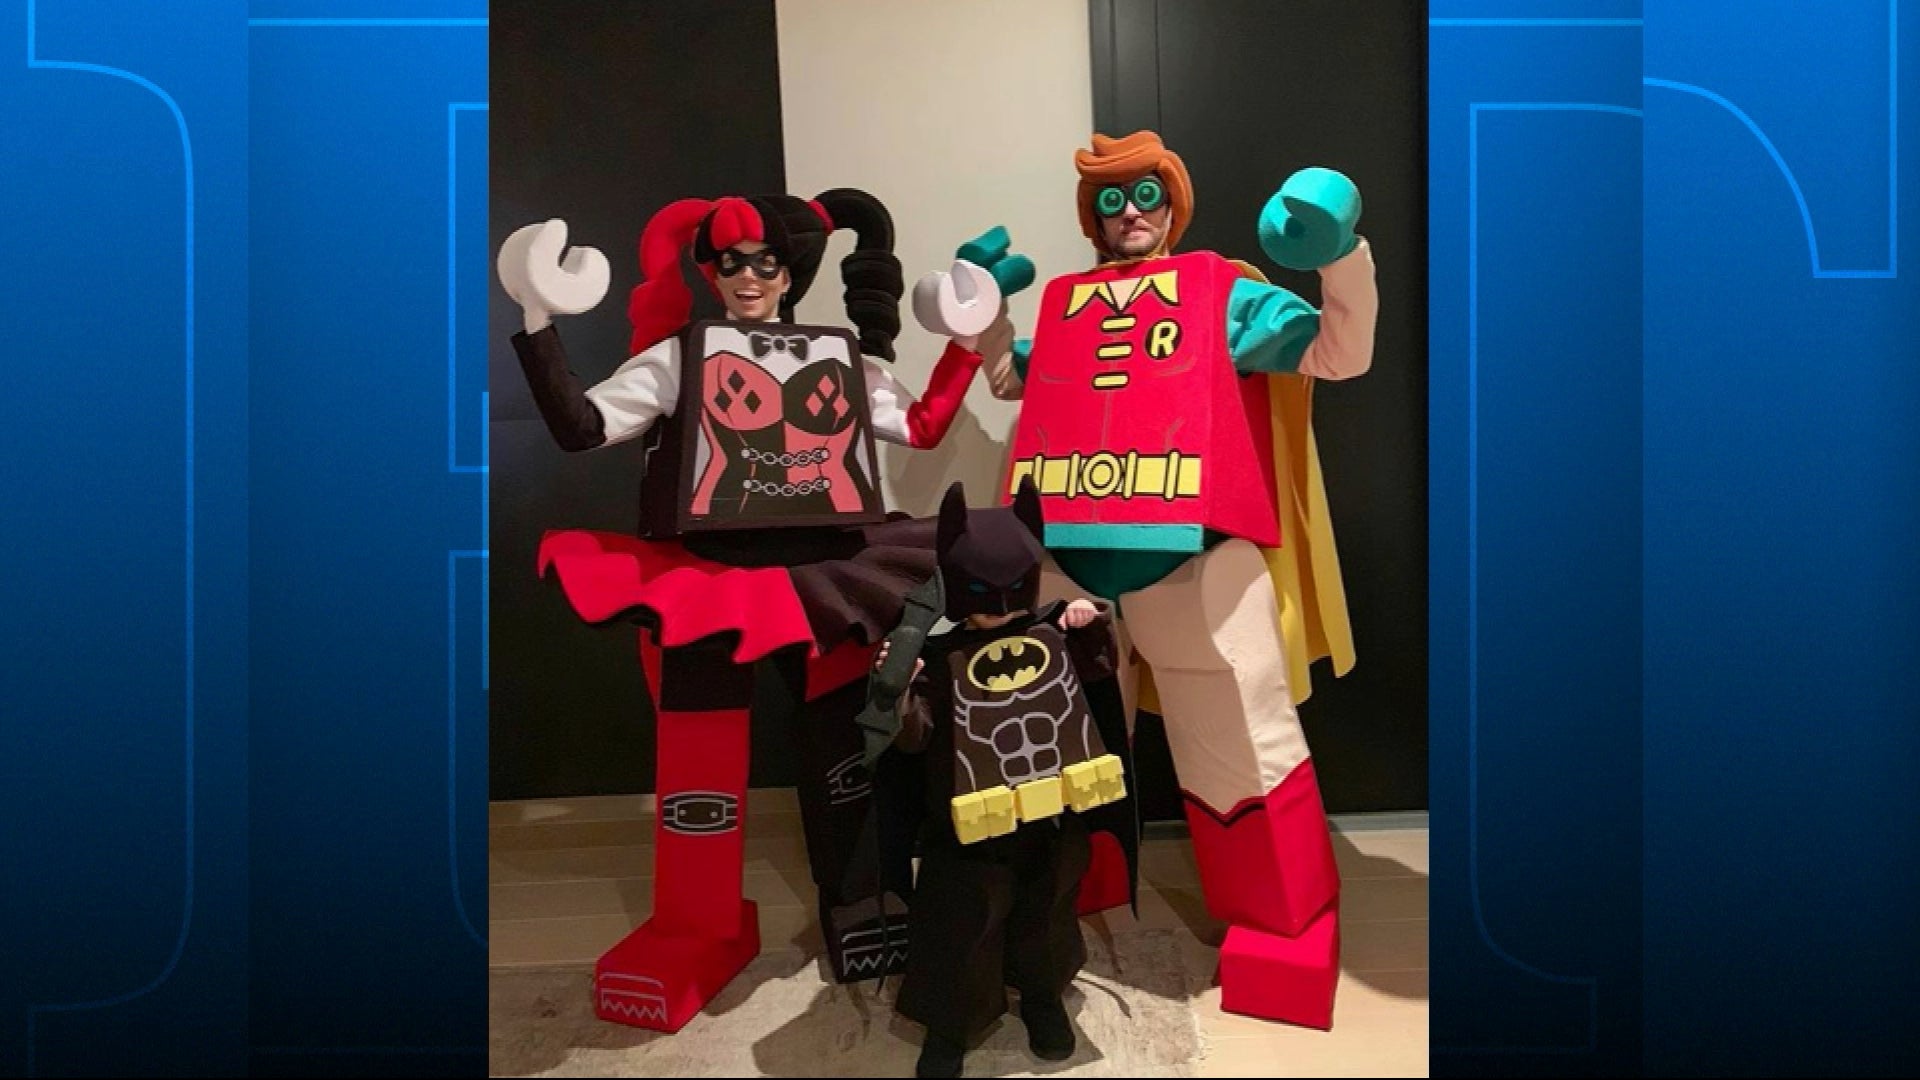 The BEST Celebrities Halloween Costumes 2018 (Jay-Z, Beyonce, Lil